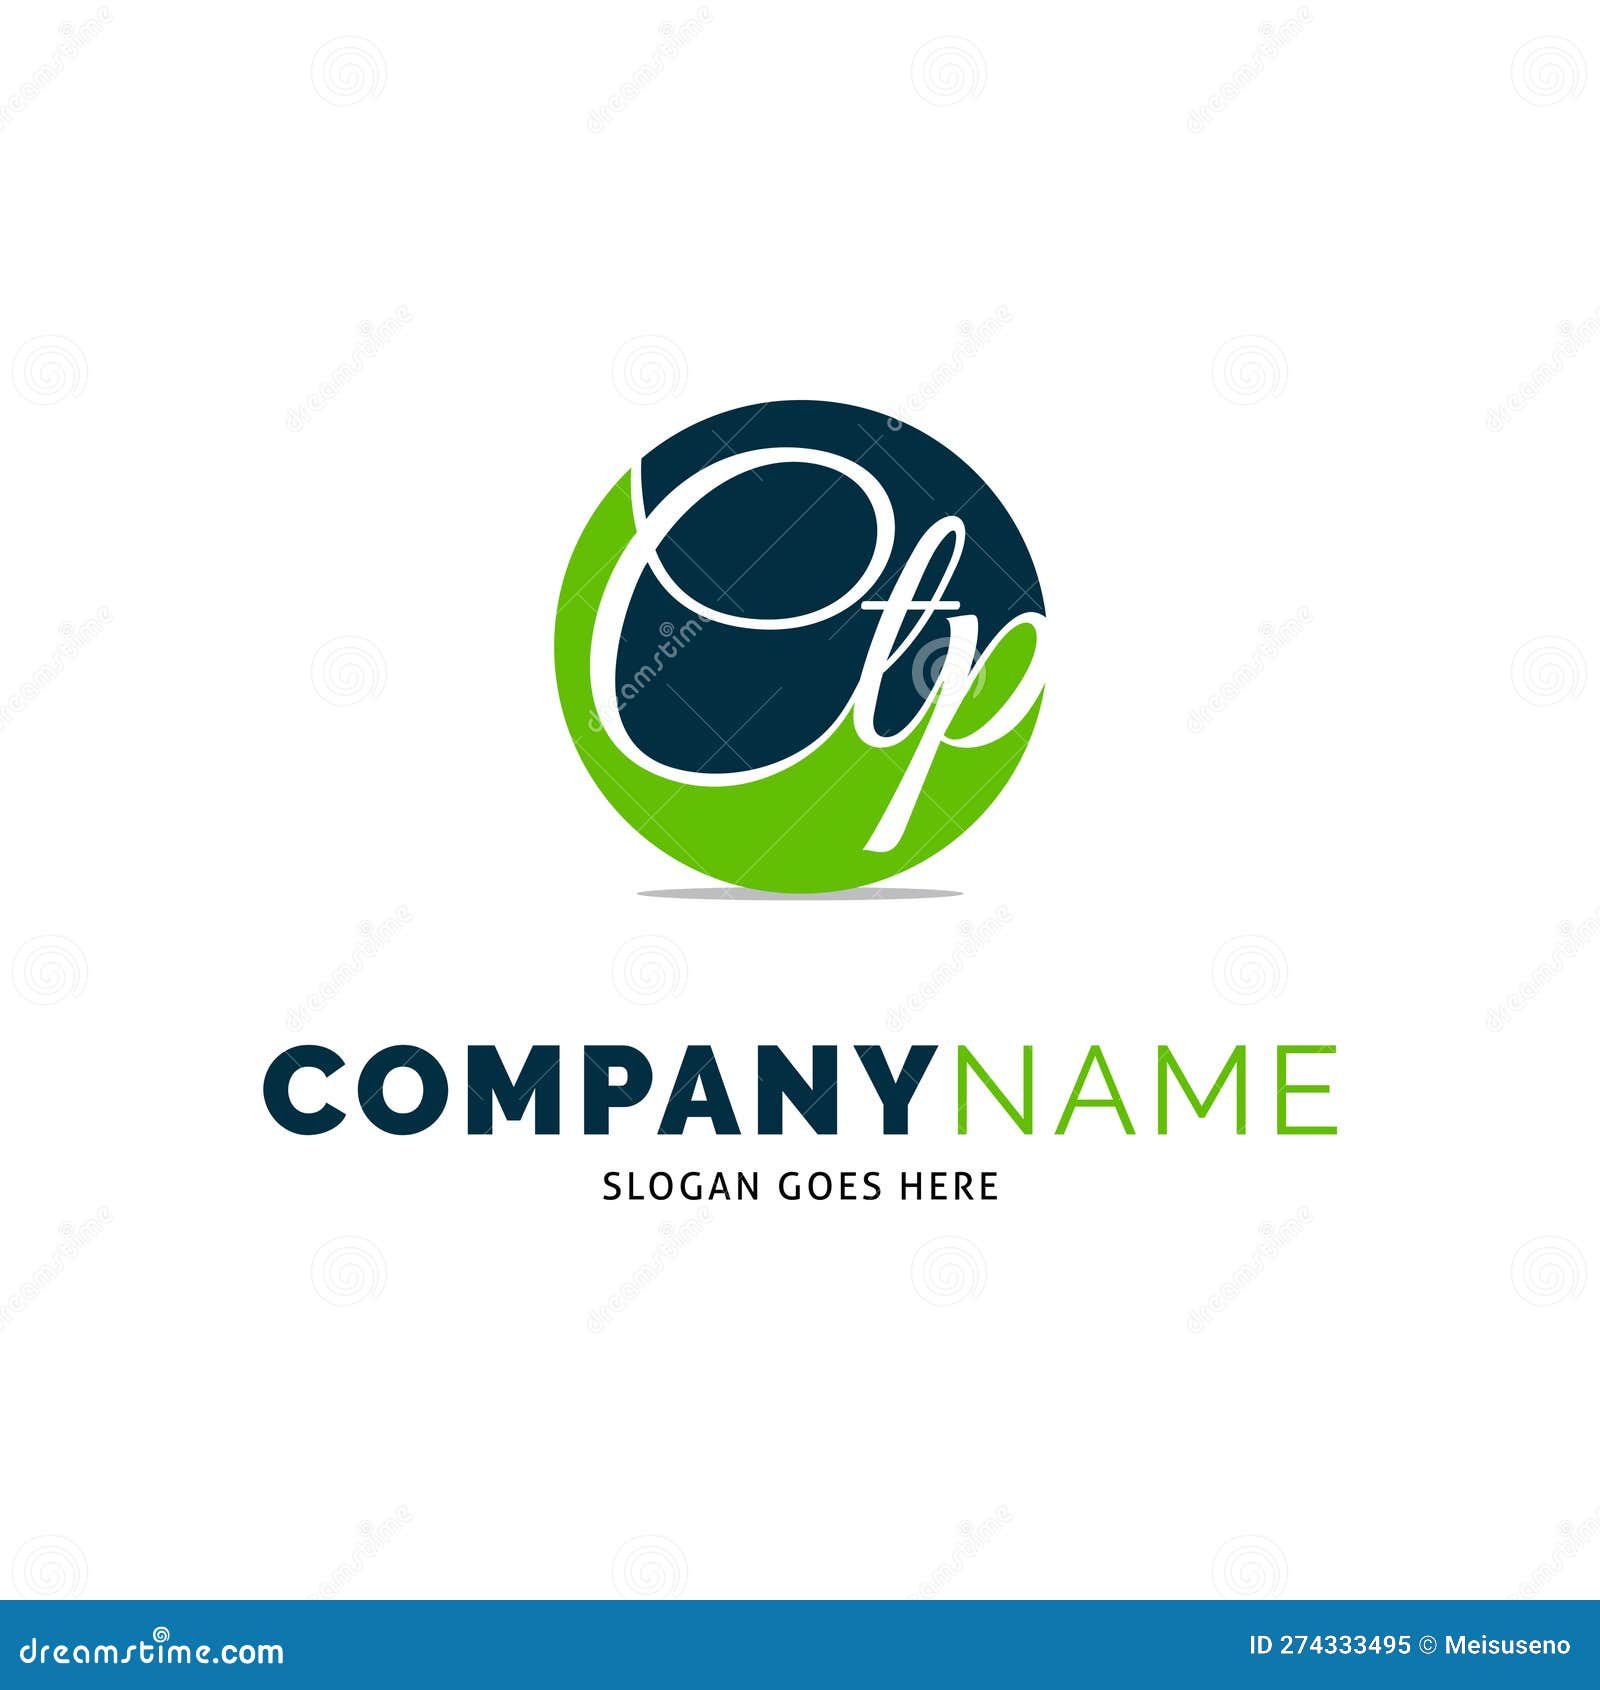 initial letter ctp icon  logo template  